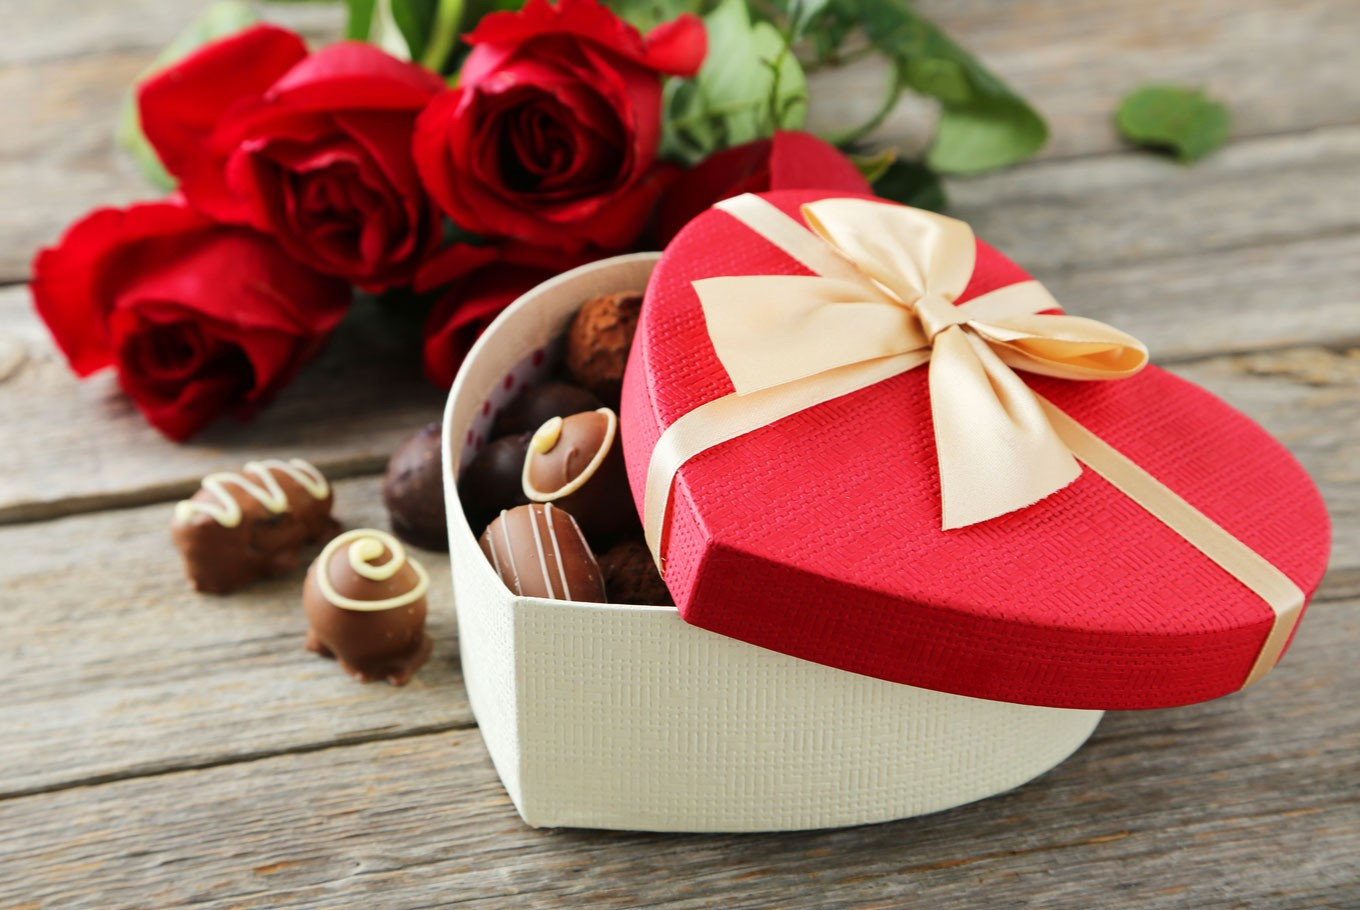 Valentines Day Candy Sale
 Chocolate flower sales expected to soar ahead of